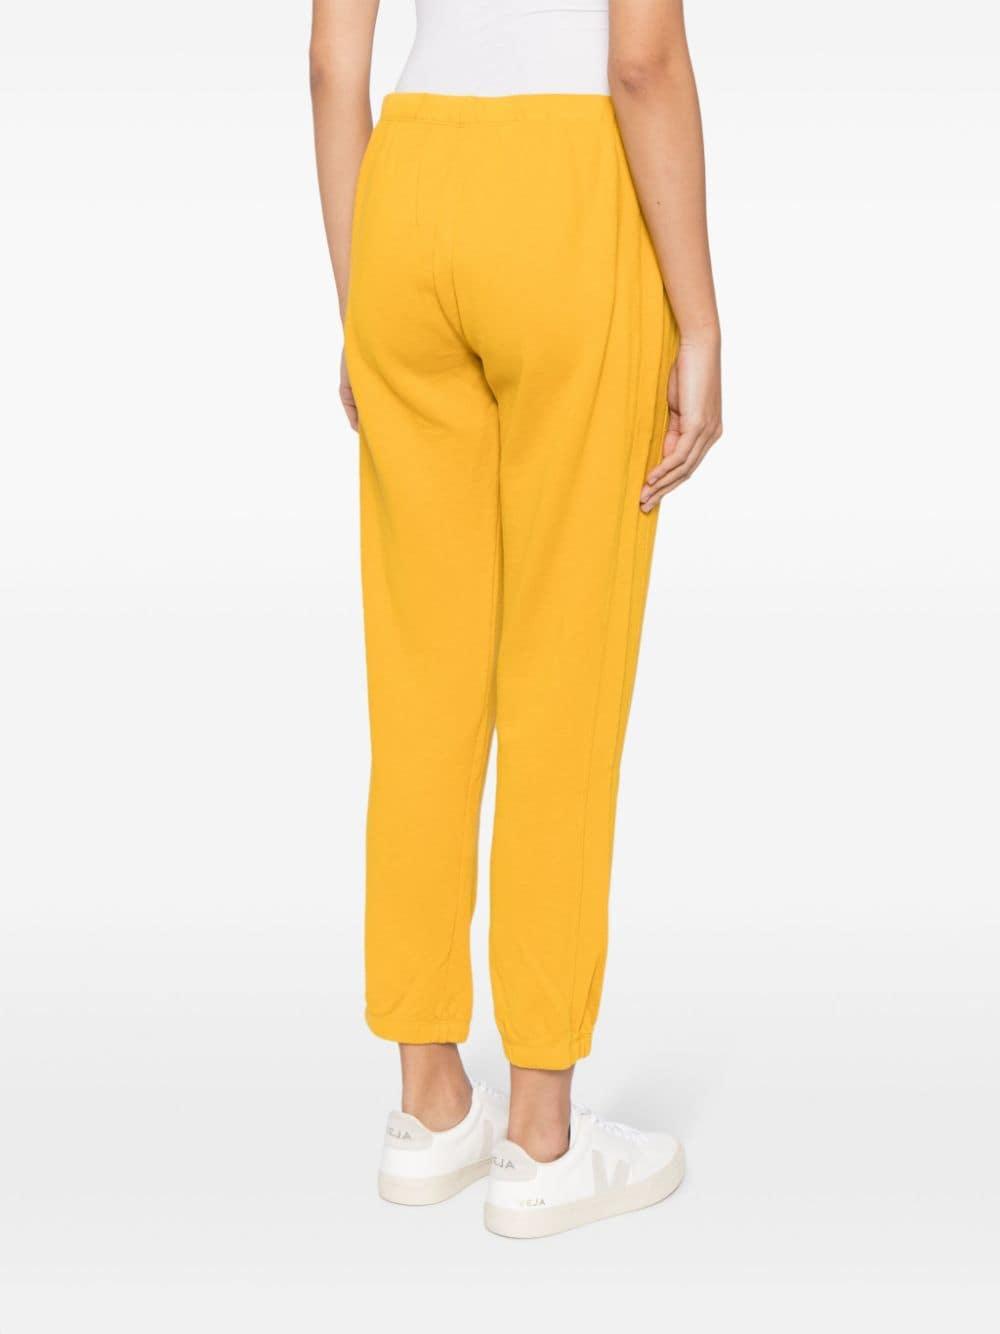 James Perse Y/osemite Cotton Track Pants in Yellow